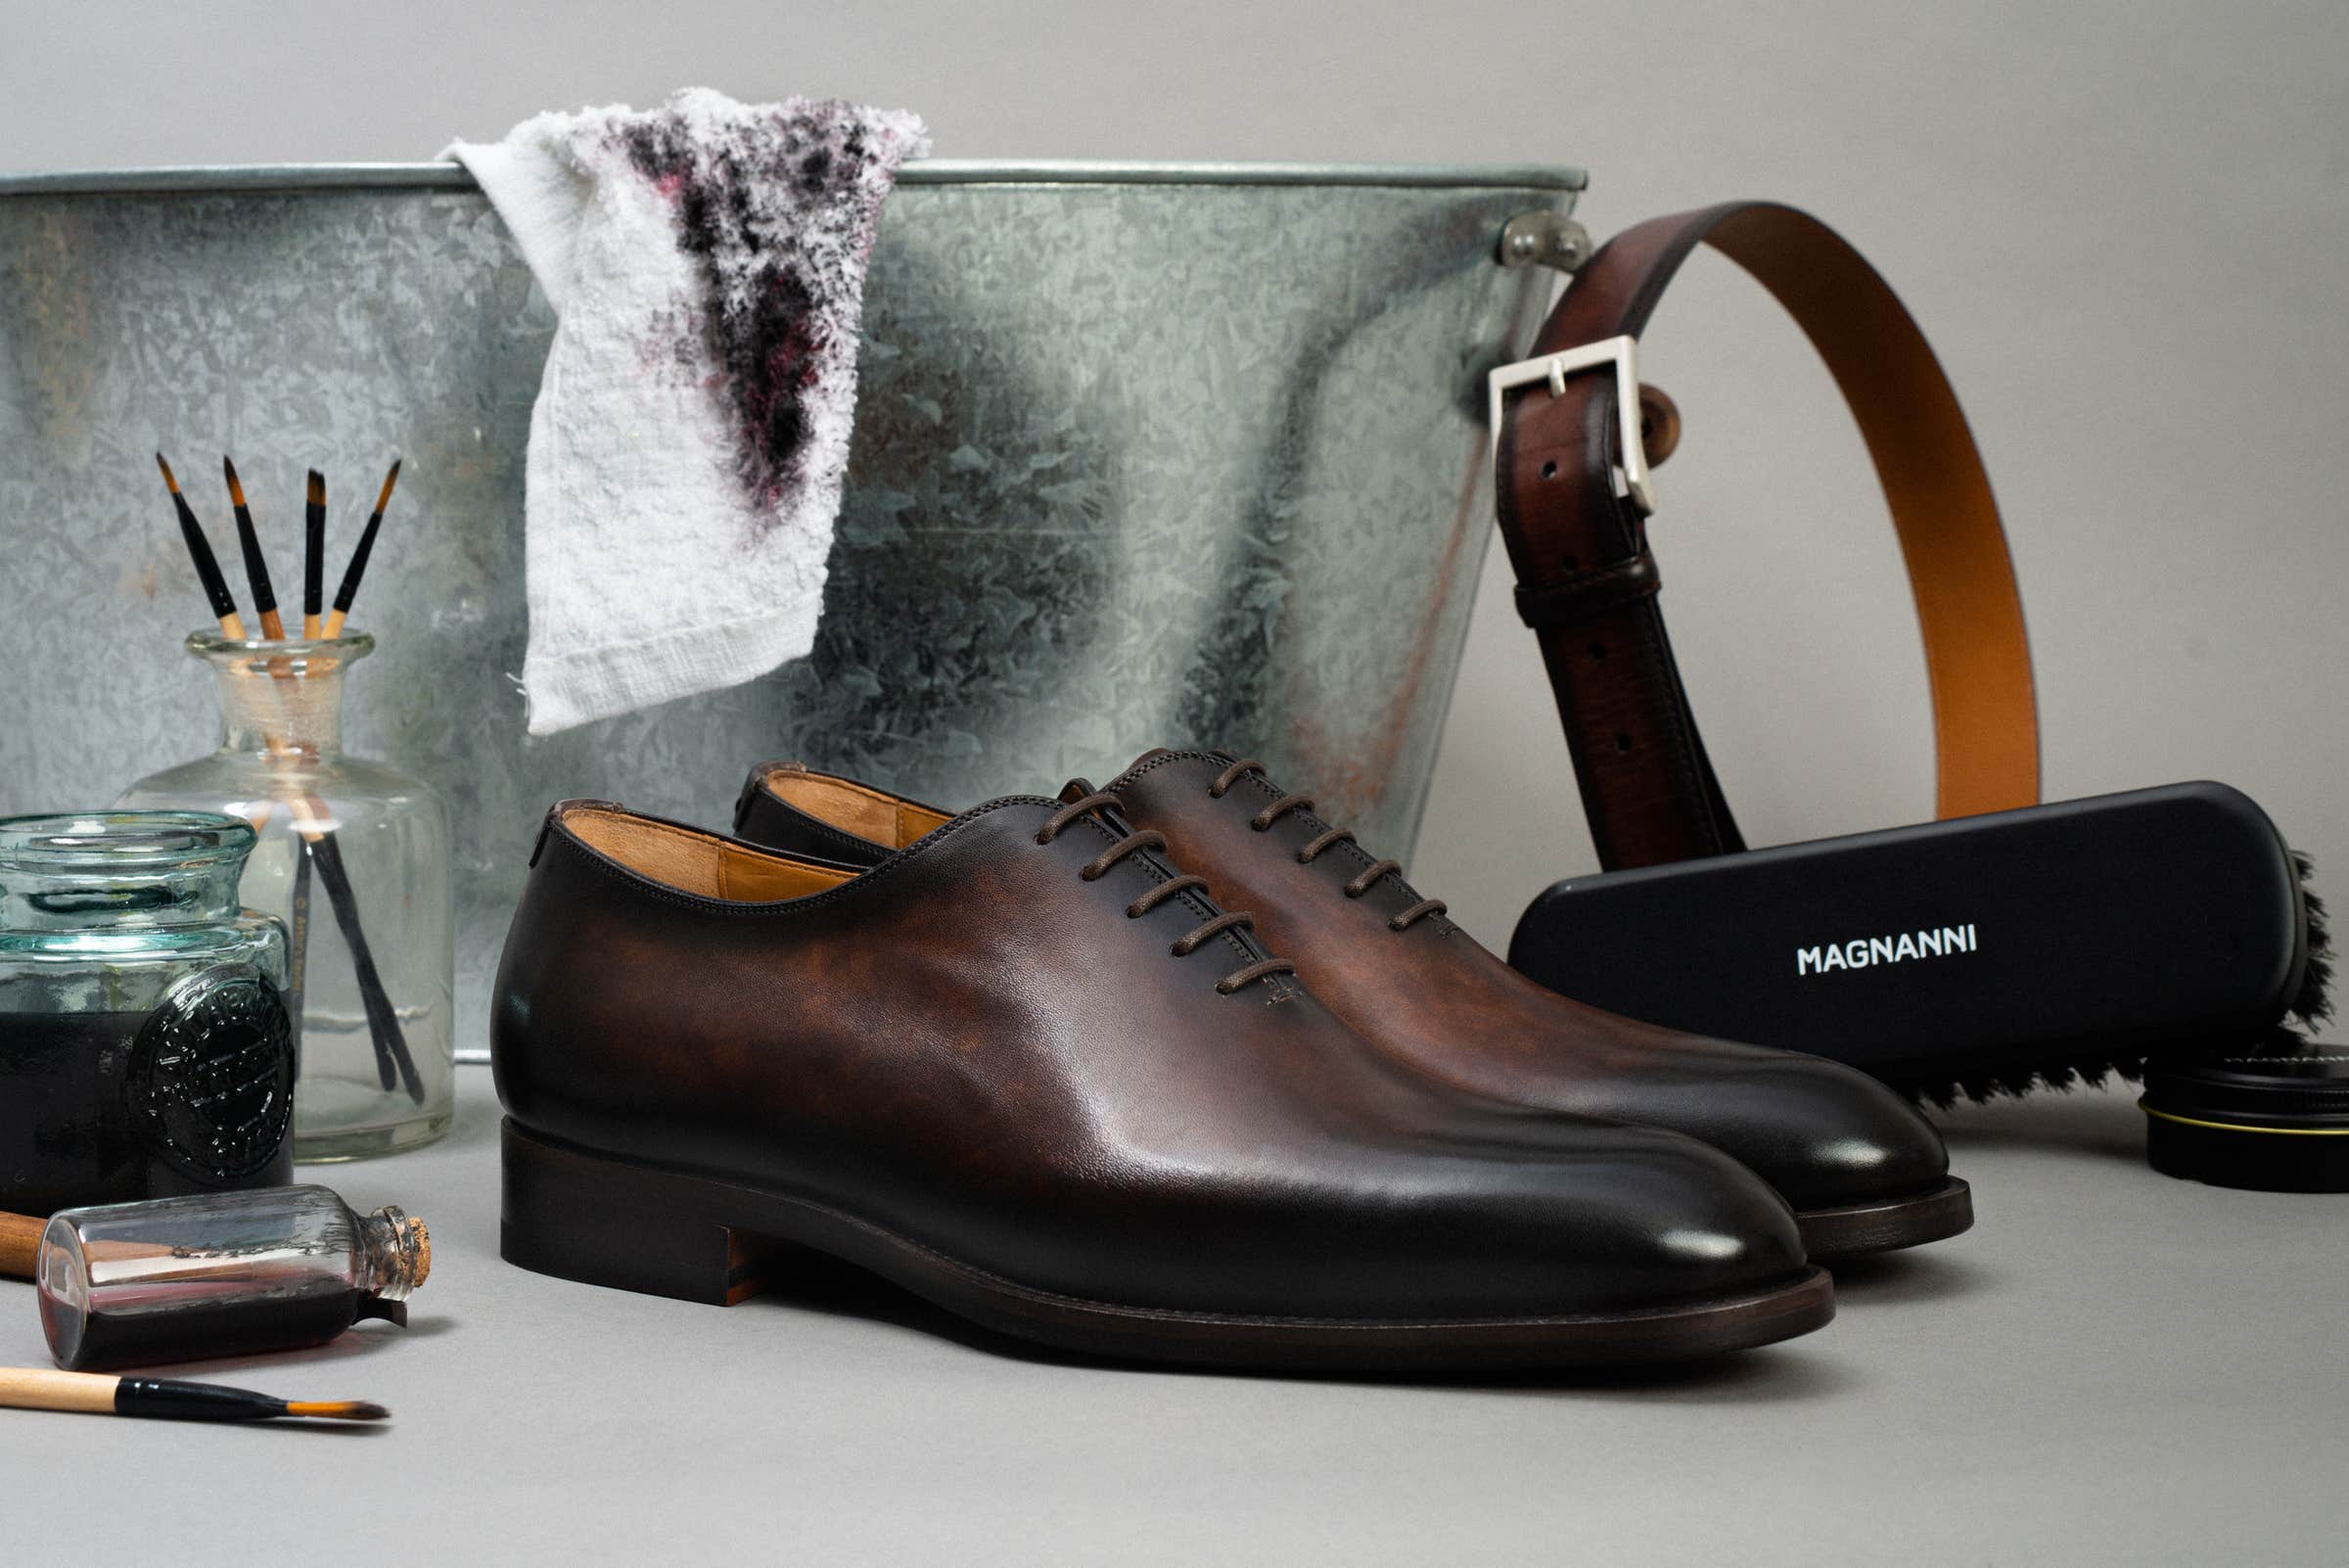 Introducing The Helm’s SS20 Magnanni Footwear Collection